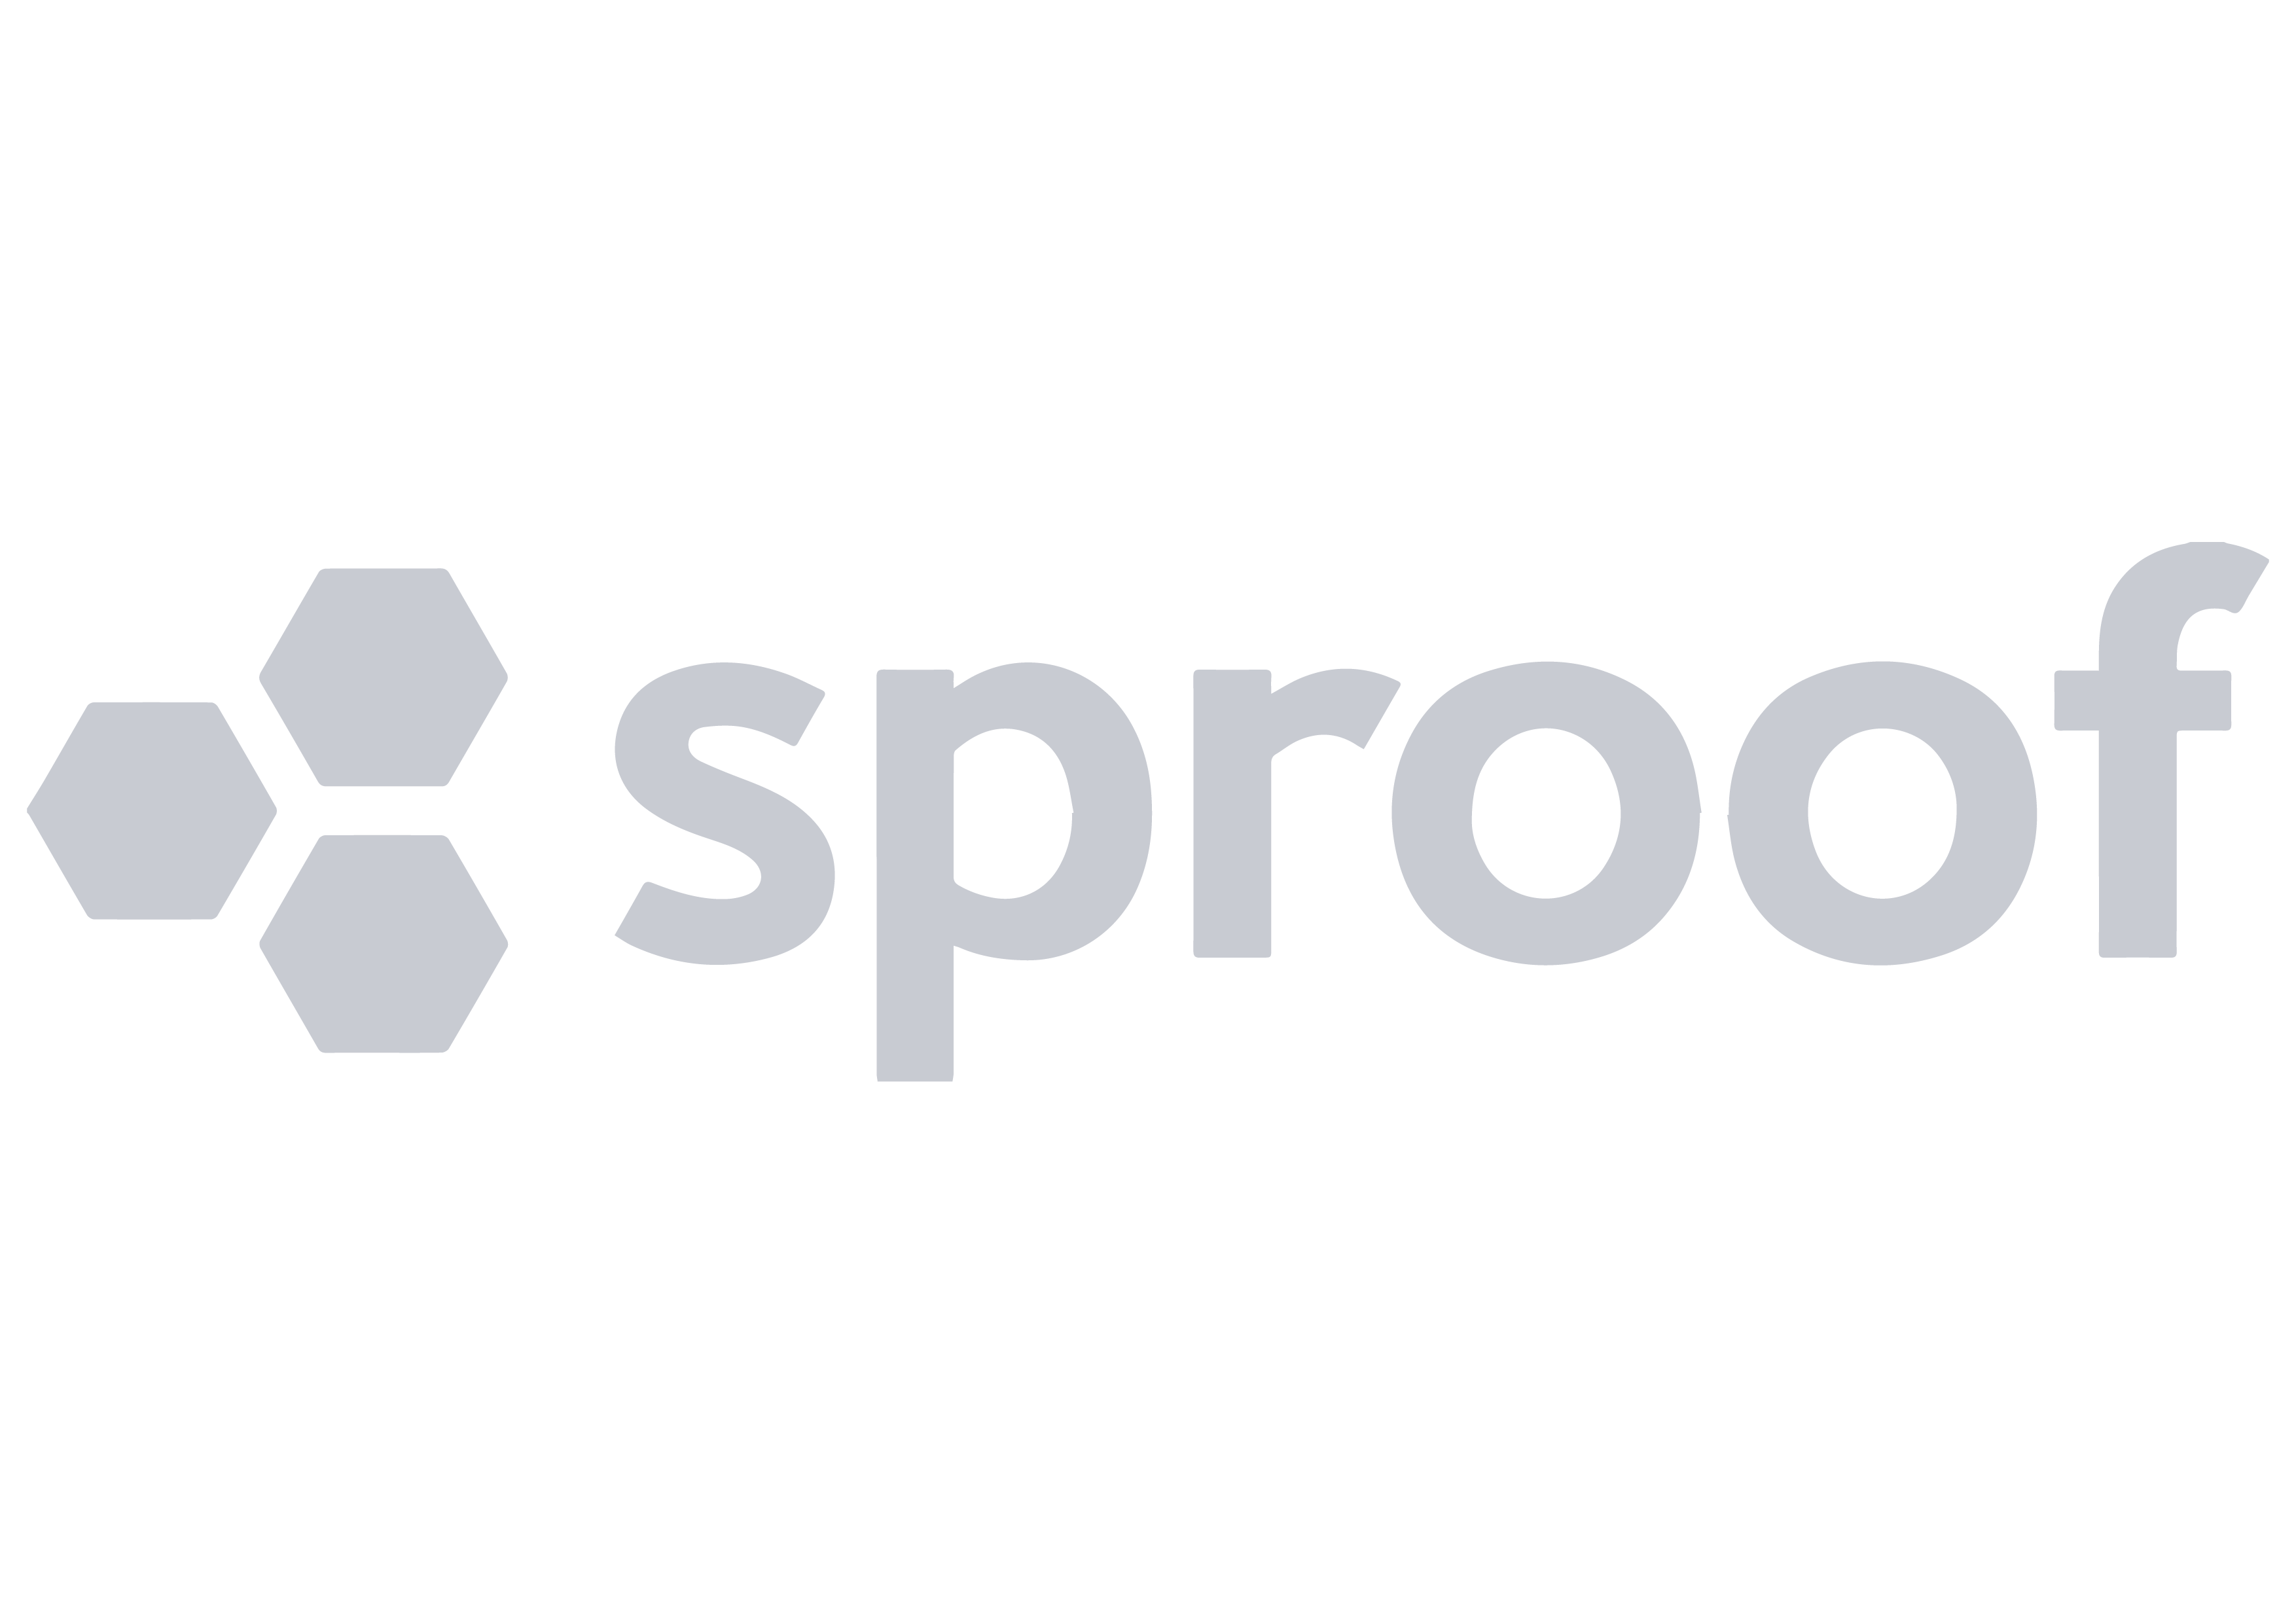 Sproof-01.png